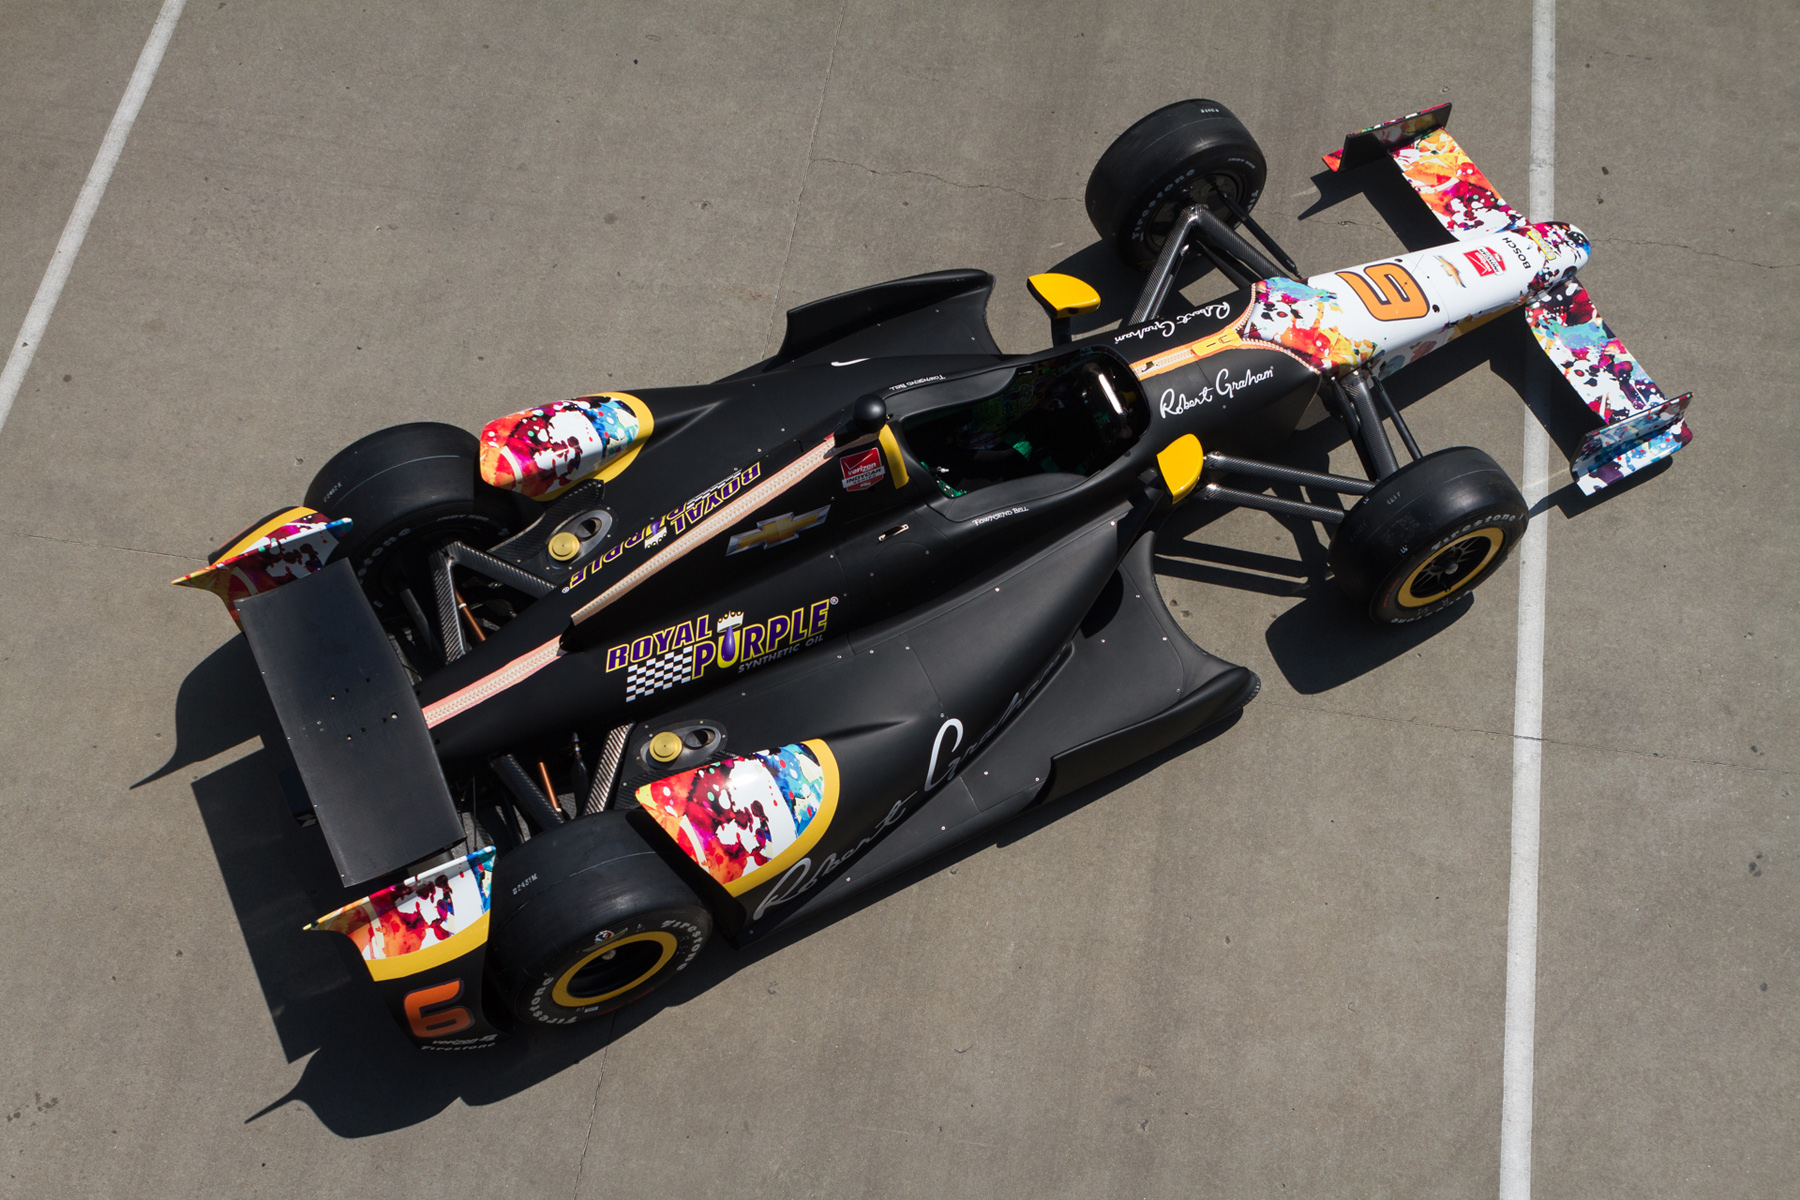 Royal Purple returns to the Indianapolis 500 with its sponsored No. 6 KV Racing Technology Chevrolet